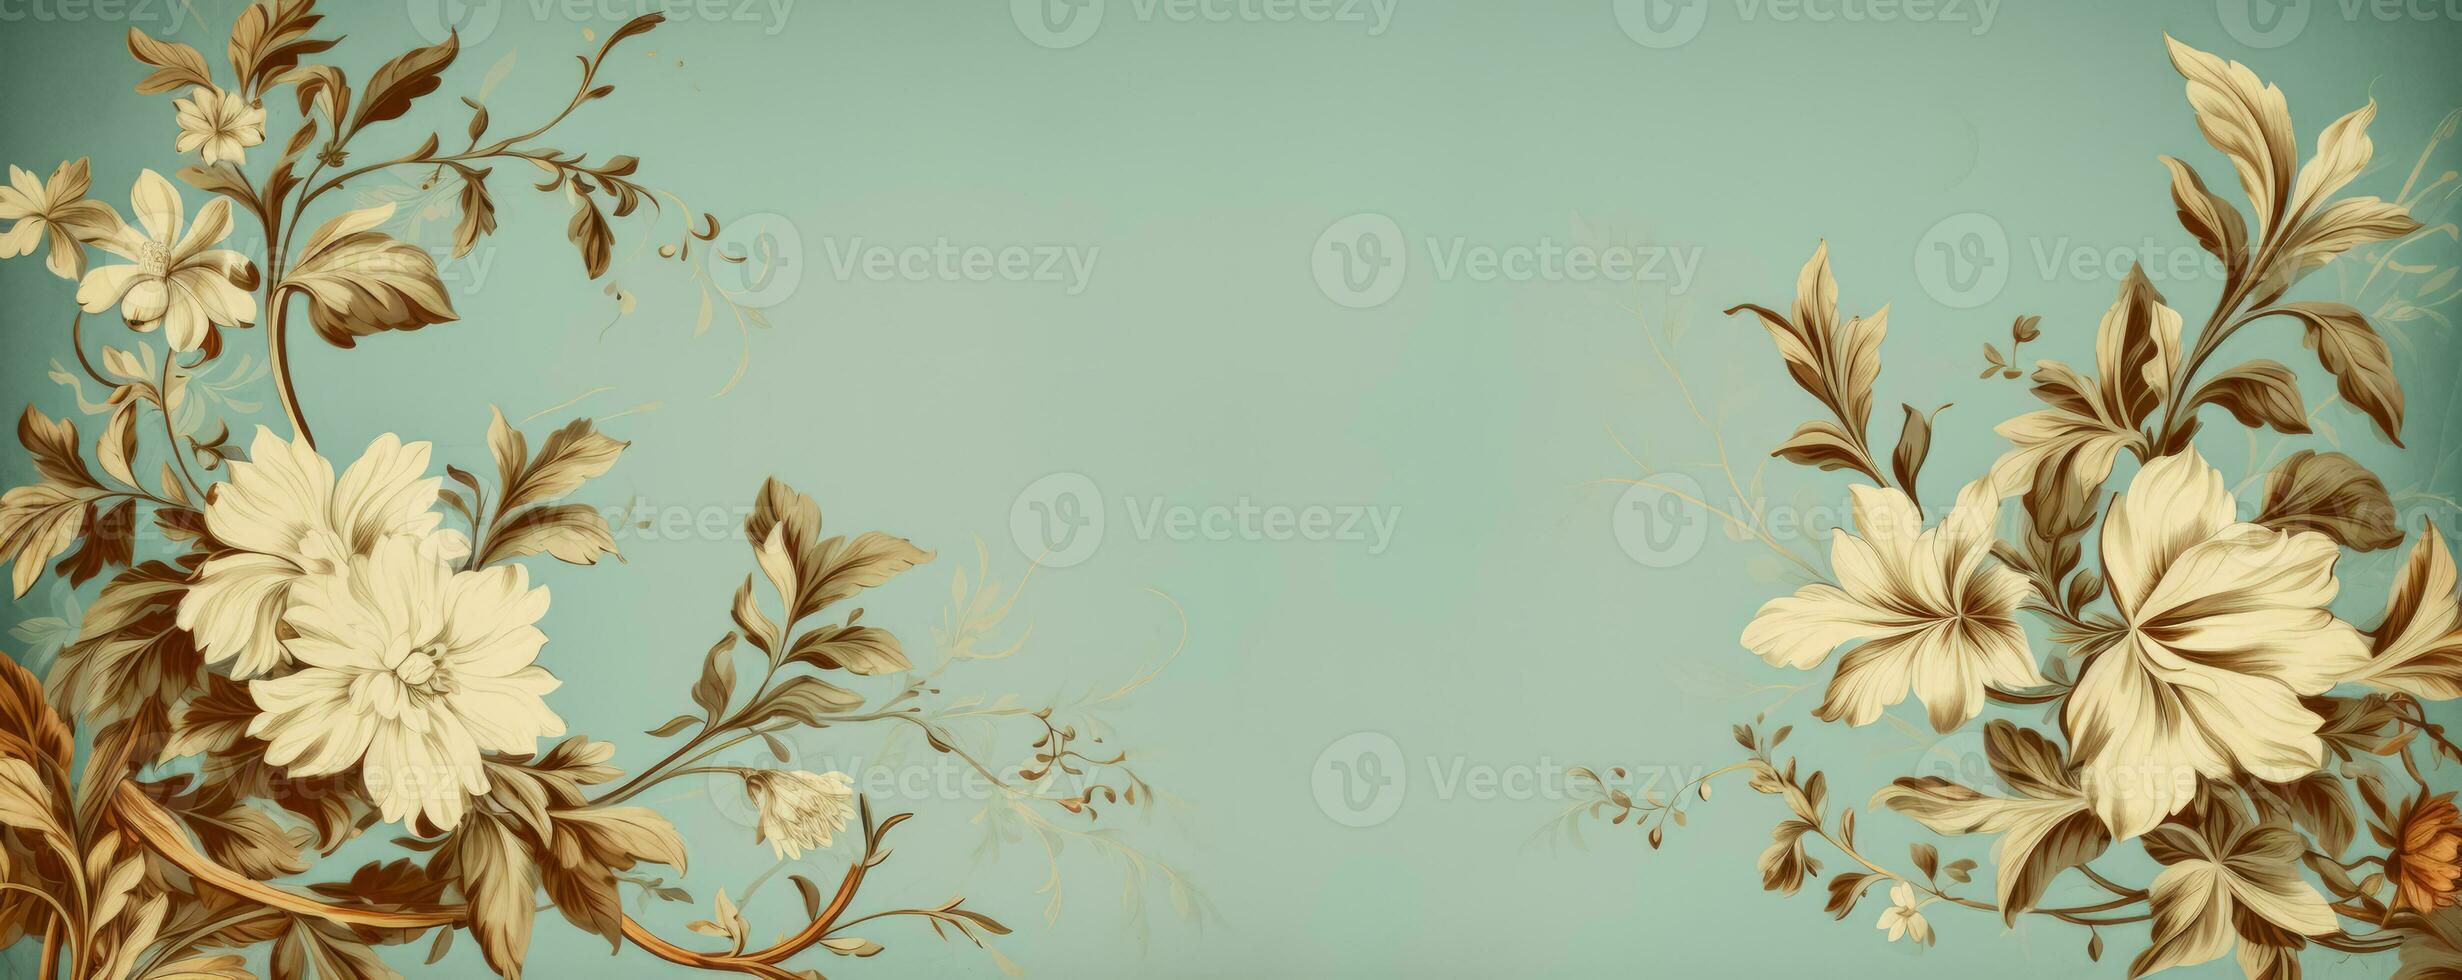 Quirky vintage wallpaper patterns background with empty space for text photo